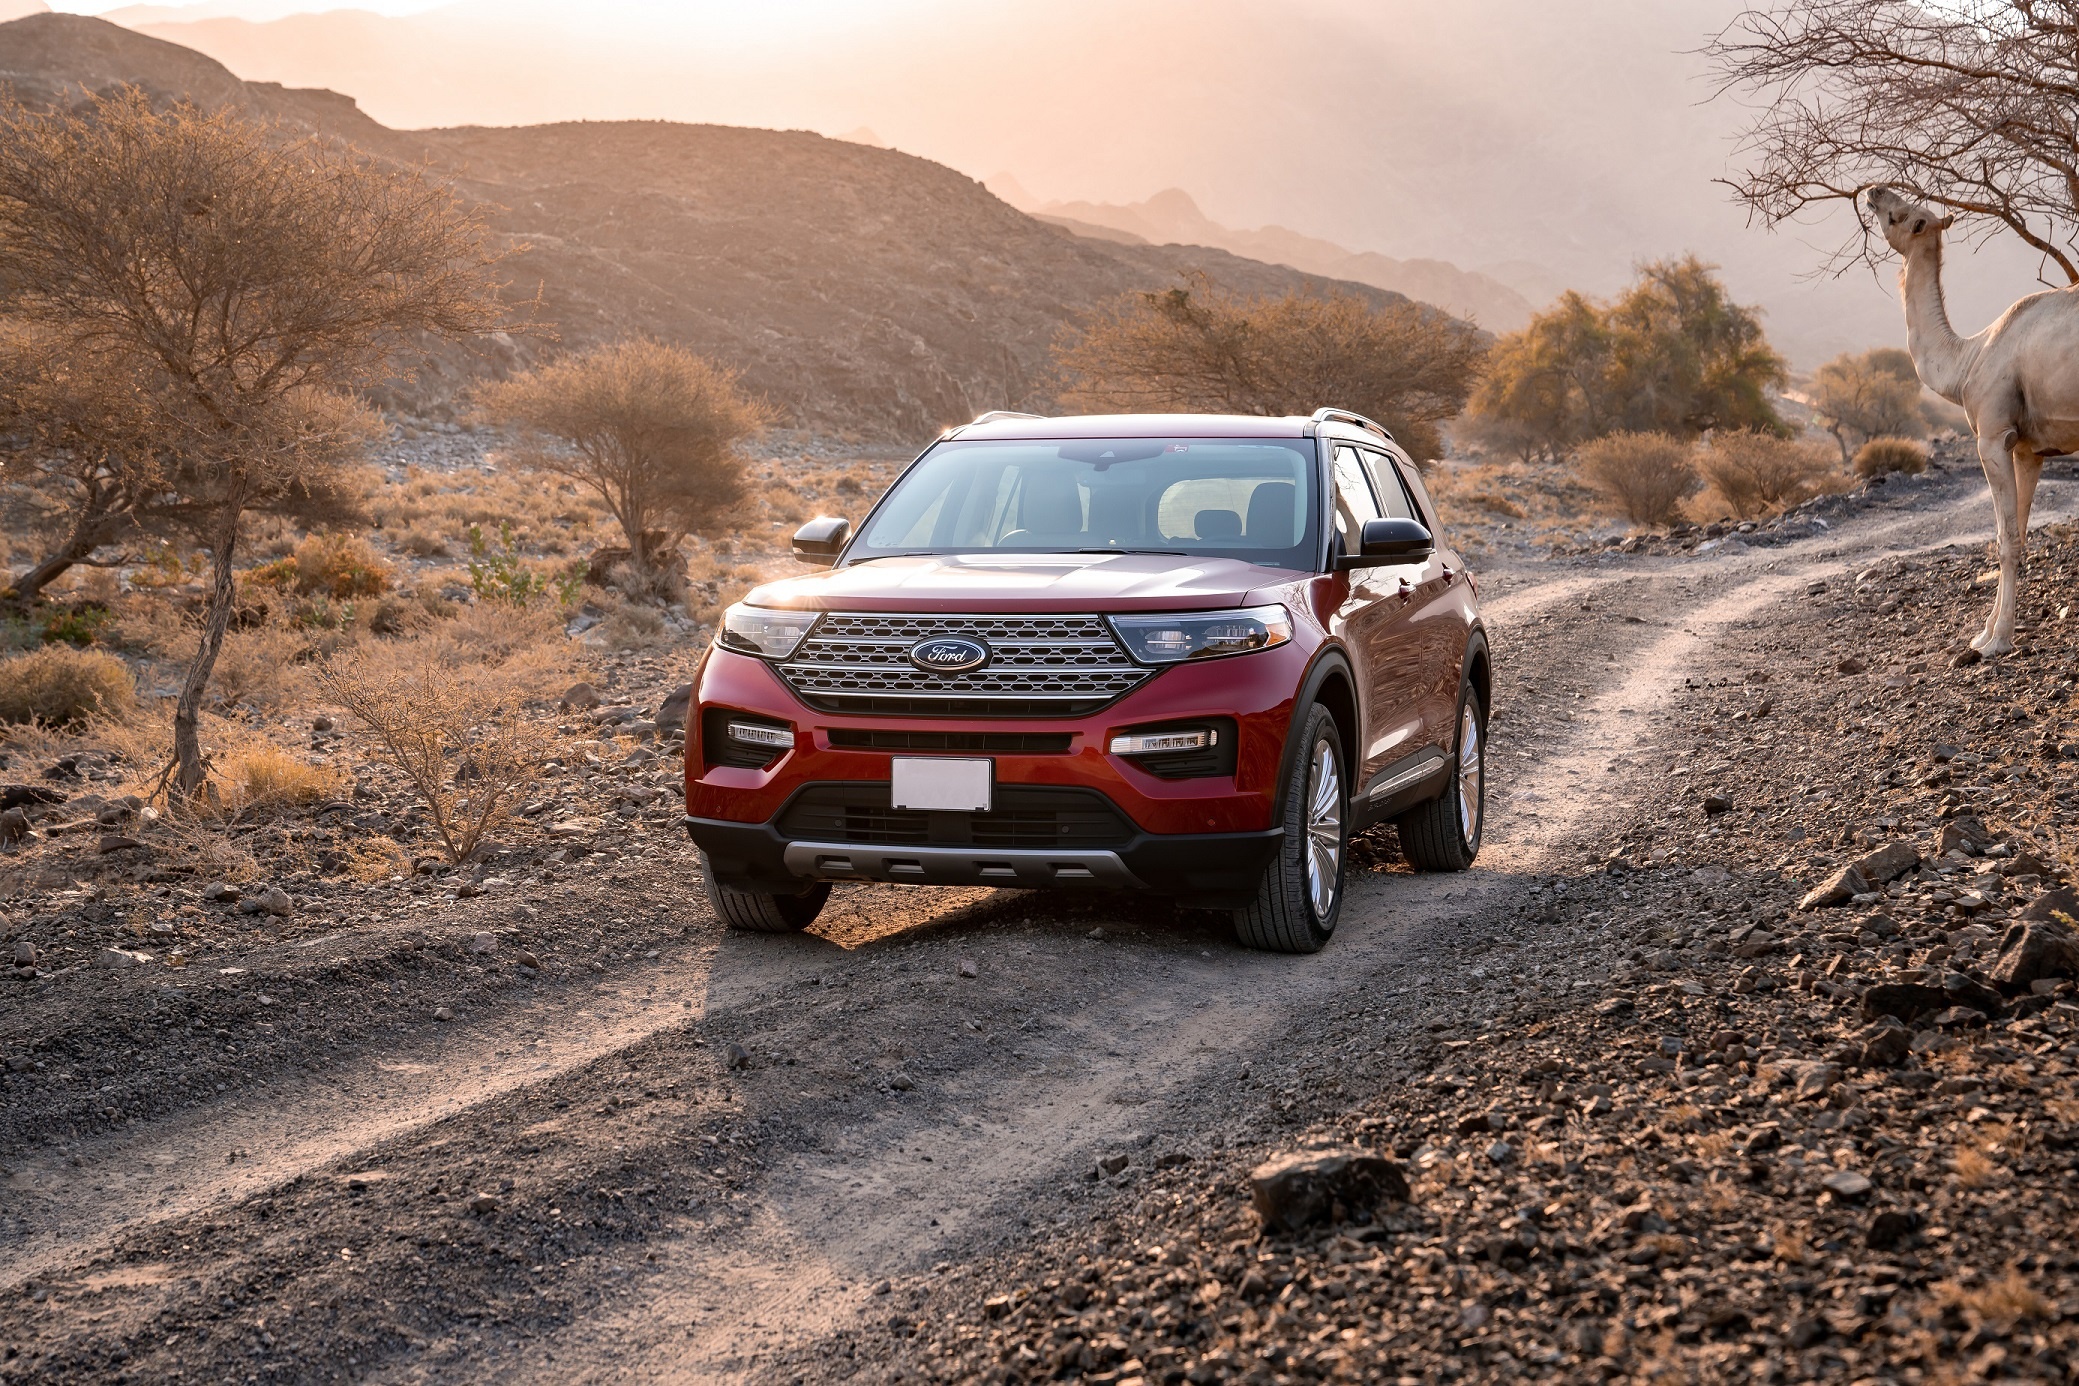 All-New Ford Explorer's handling and power make it your ideal weekend escape vehicle